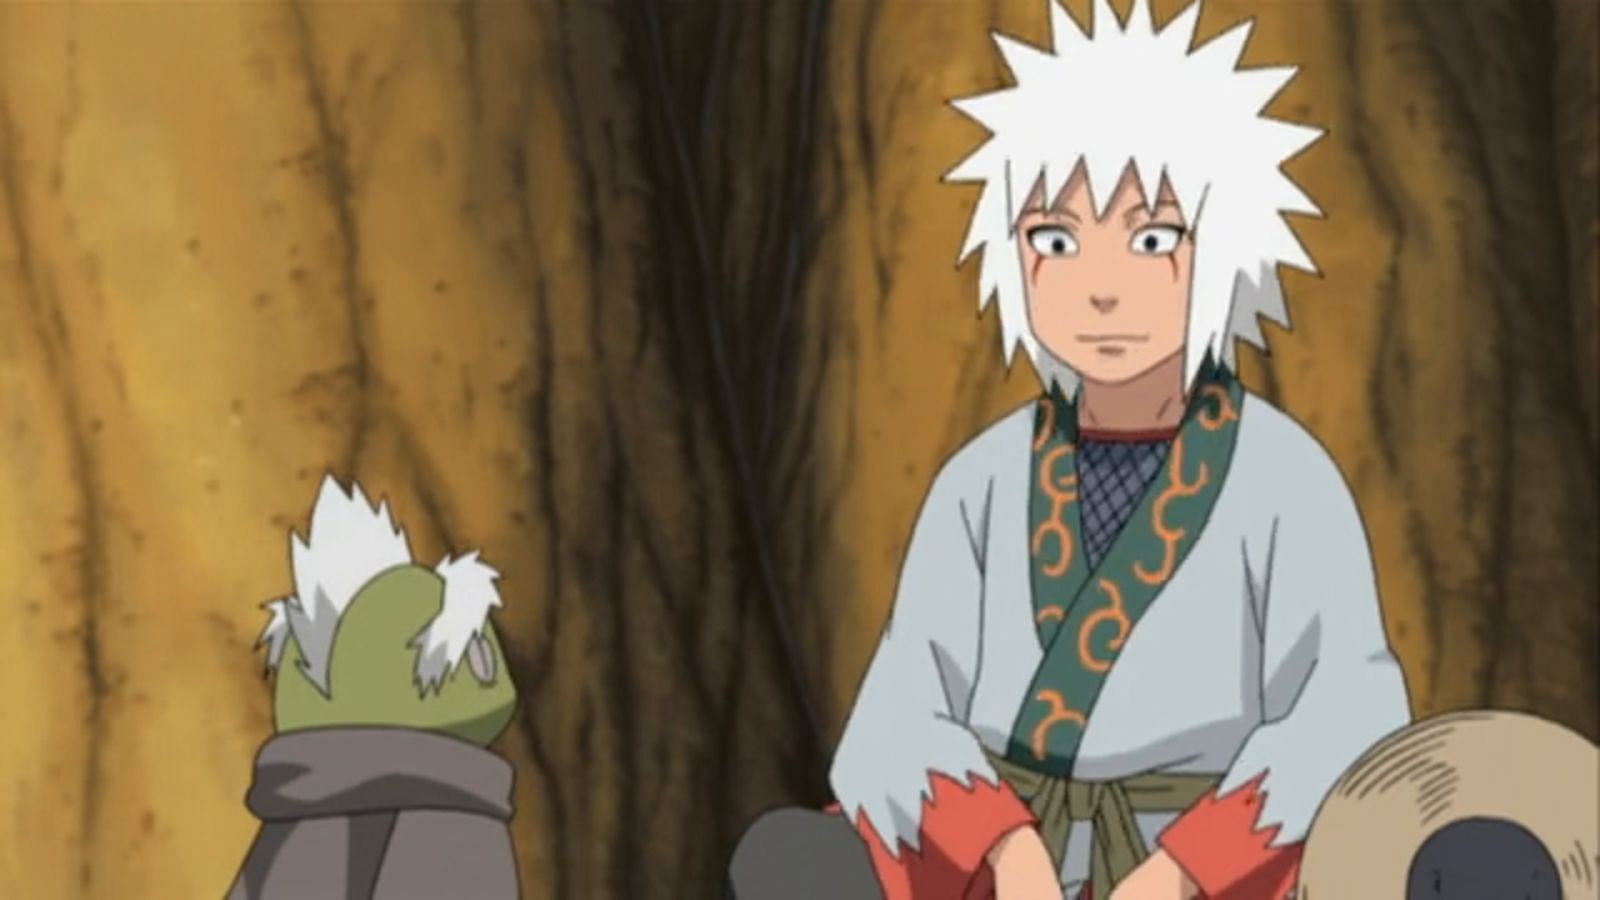 Why didn't The Third Hokage ever go to Mount Myoboku to learn Sage Mode  from the toads like his teacher AND student both did? He would have been  able to easily defeated